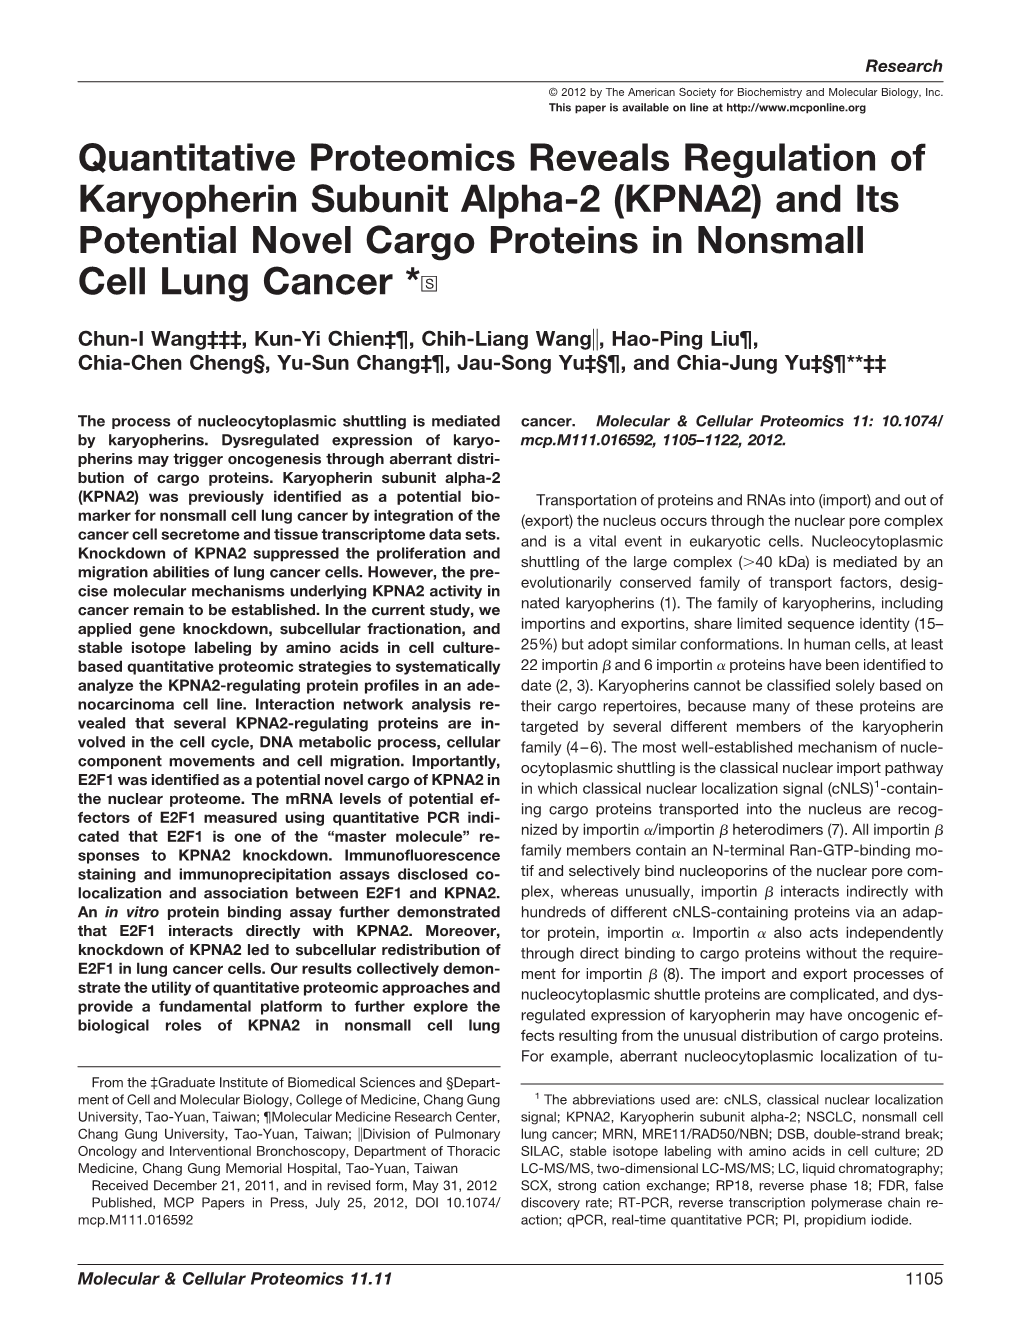 (KPNA2) and Its Potential Novel Cargo Proteins in Nonsmall Cell Lung Cancer *□S